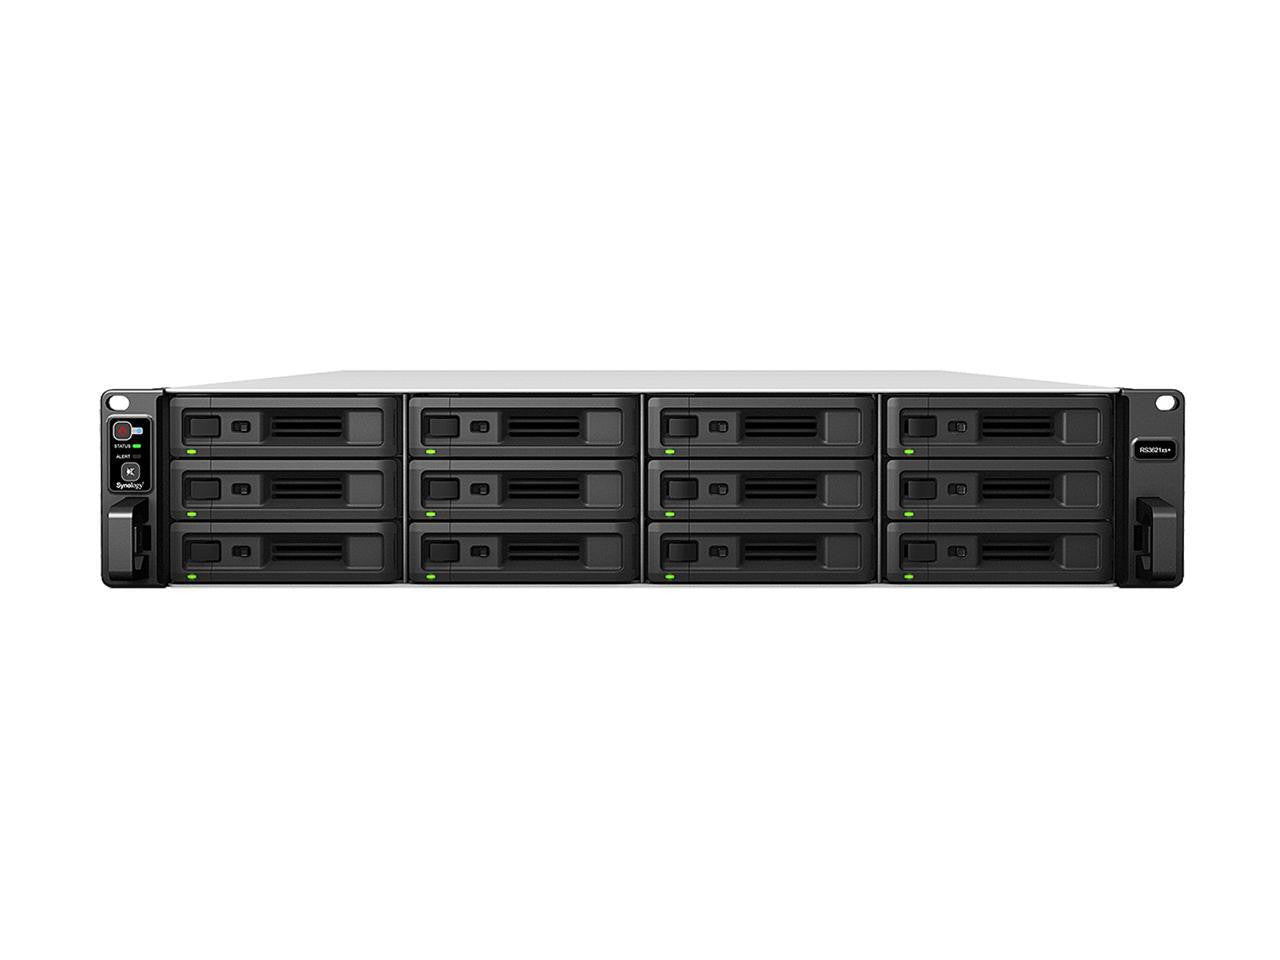 RS3621xs+ 12-BAY RackStation with 32GB RAM and 5.76TB (12 x 480GB) of Synology Enterprise Solid State Drives